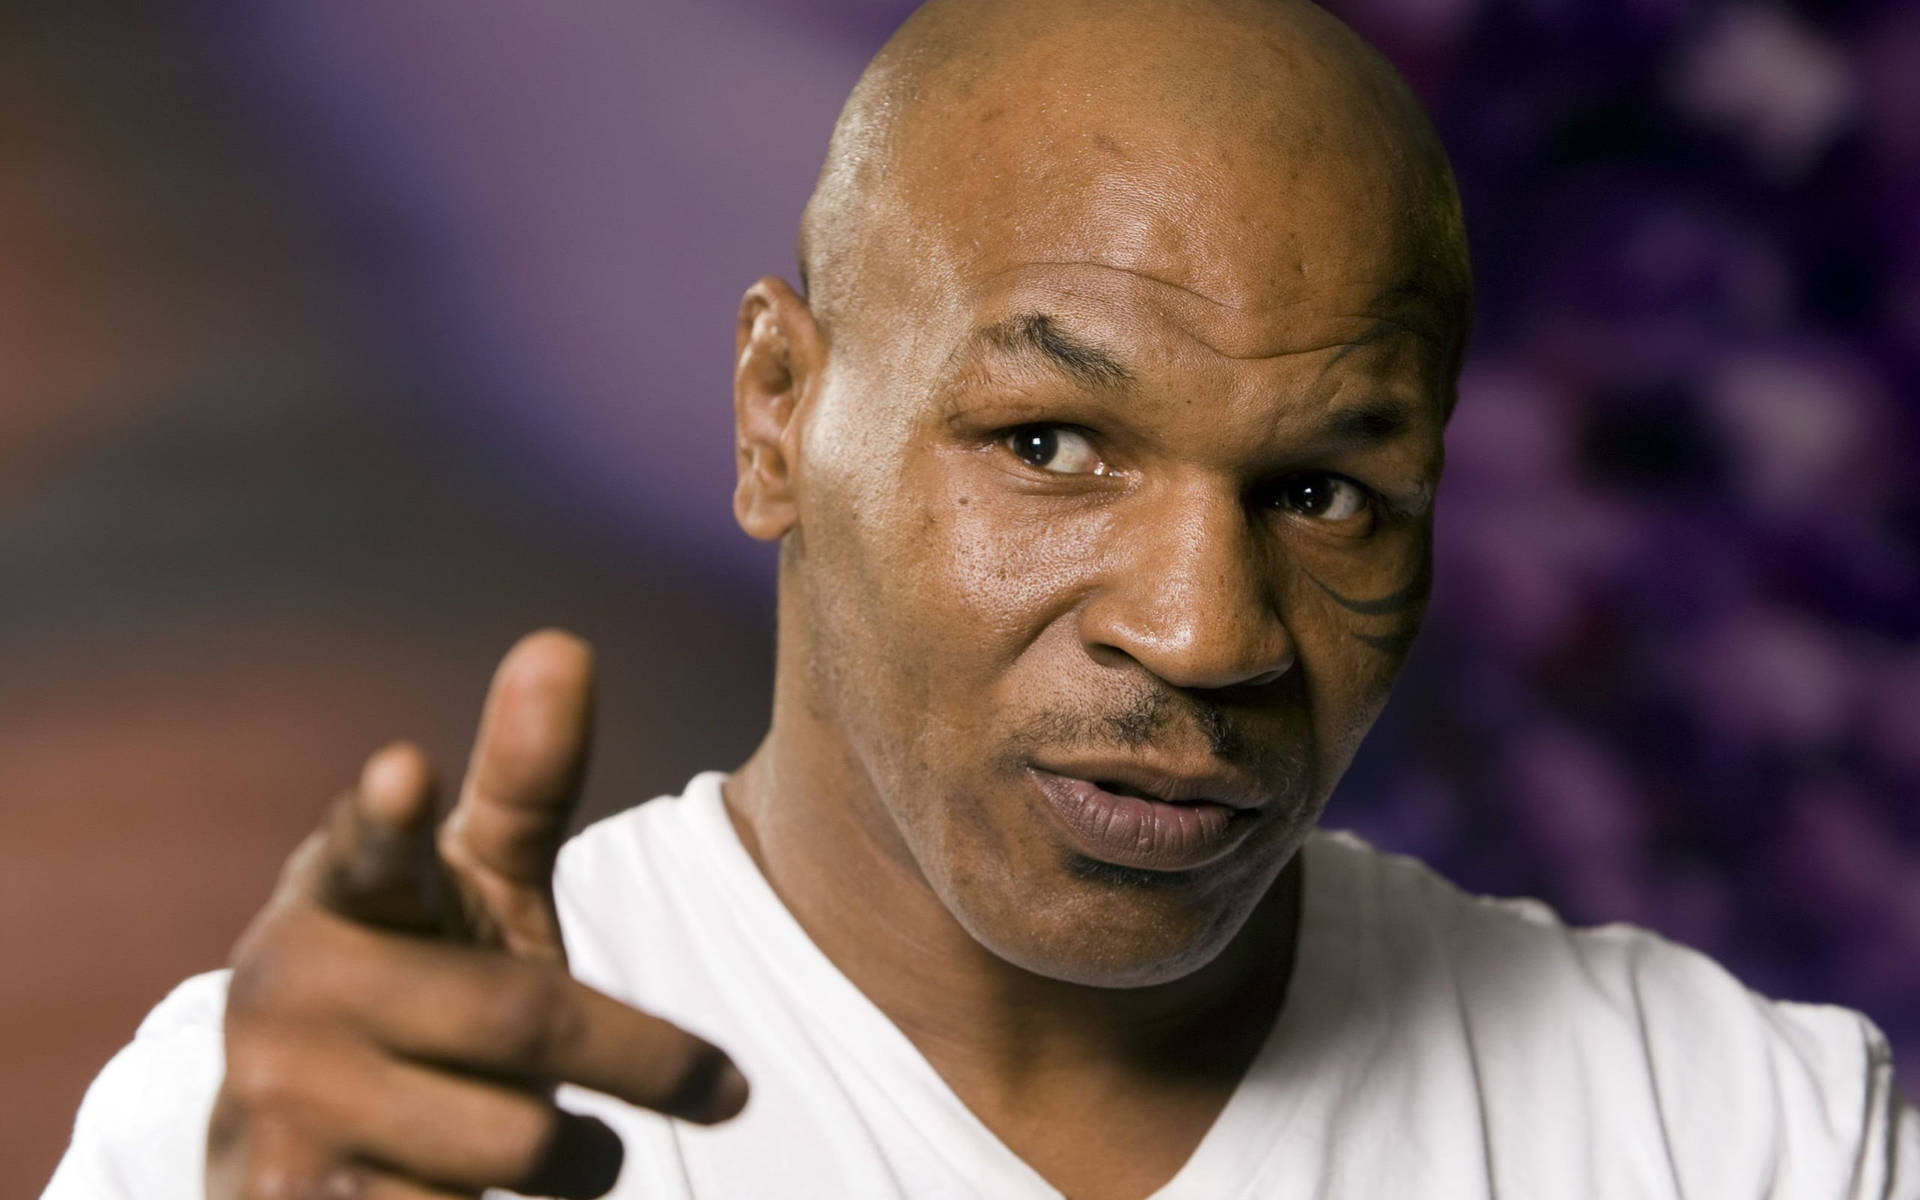 A Candid Mike Tyson 4K Wallpaper